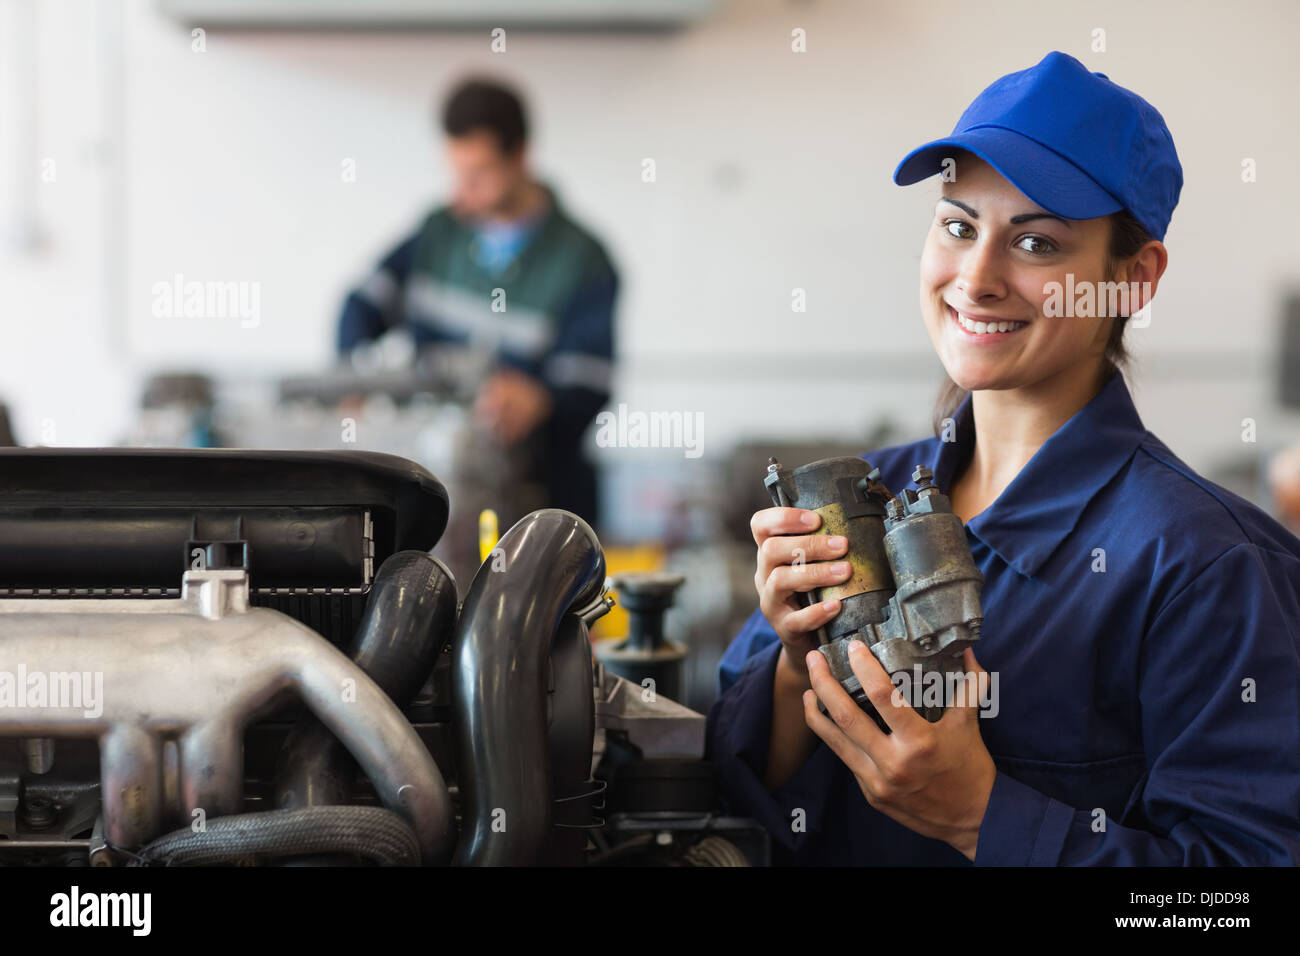 Smiling trainee showing part of a machine Stock Photo